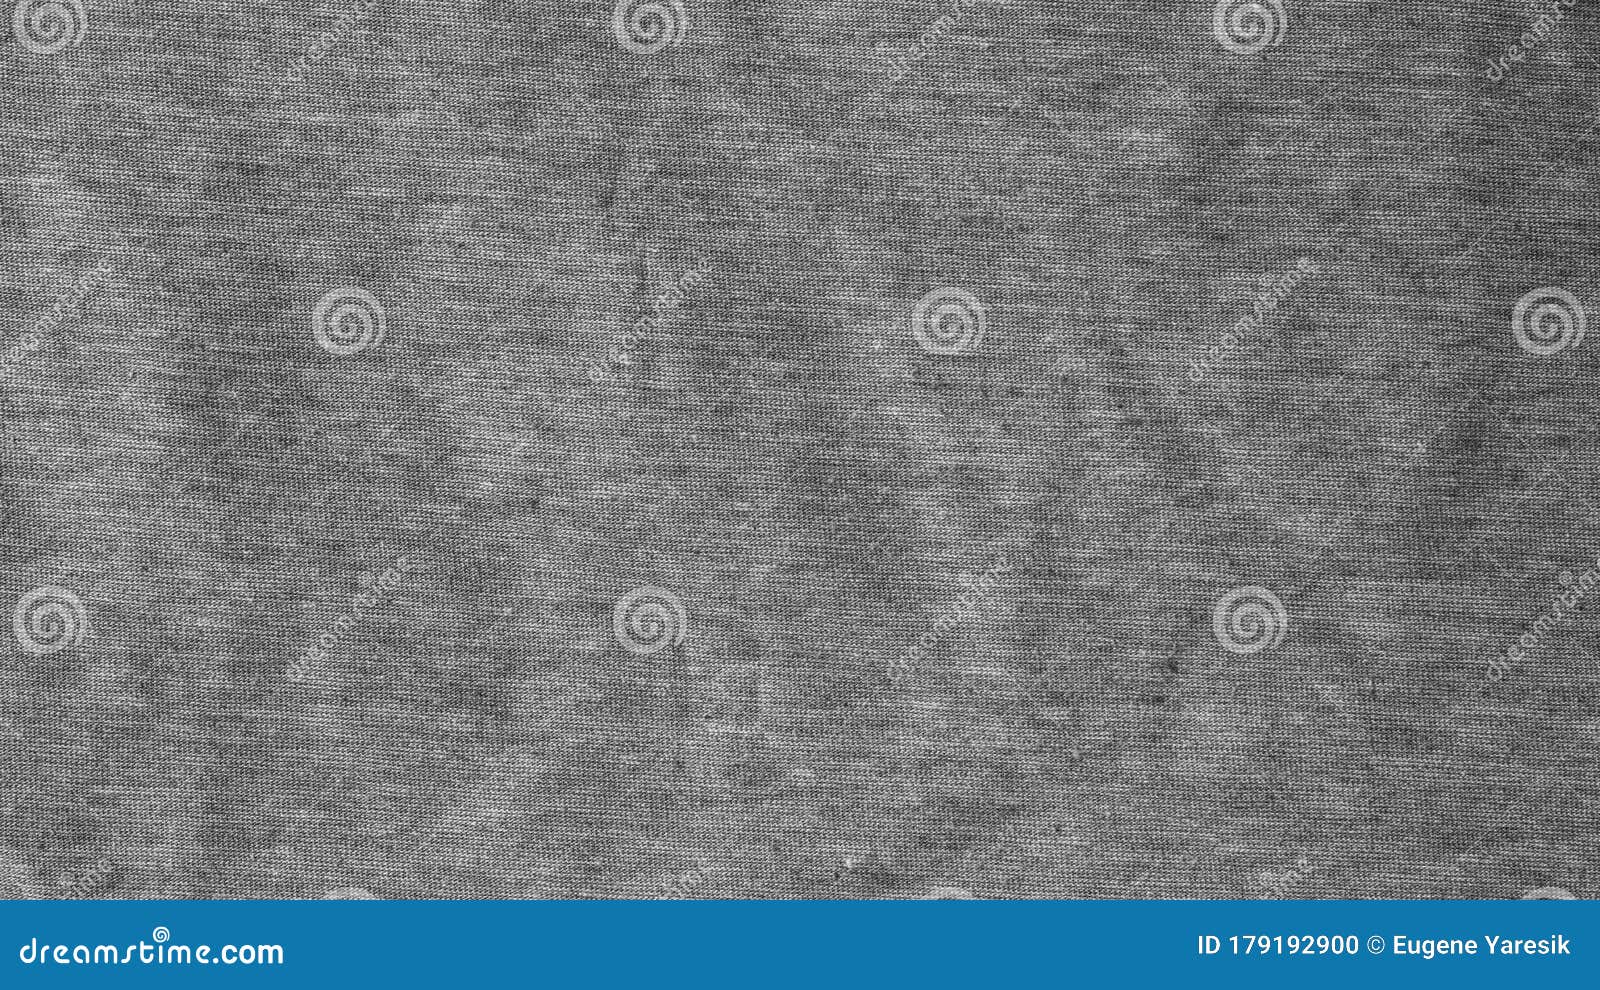 Crumpled gray fabric. stock photo. Image of abstract - 179192900